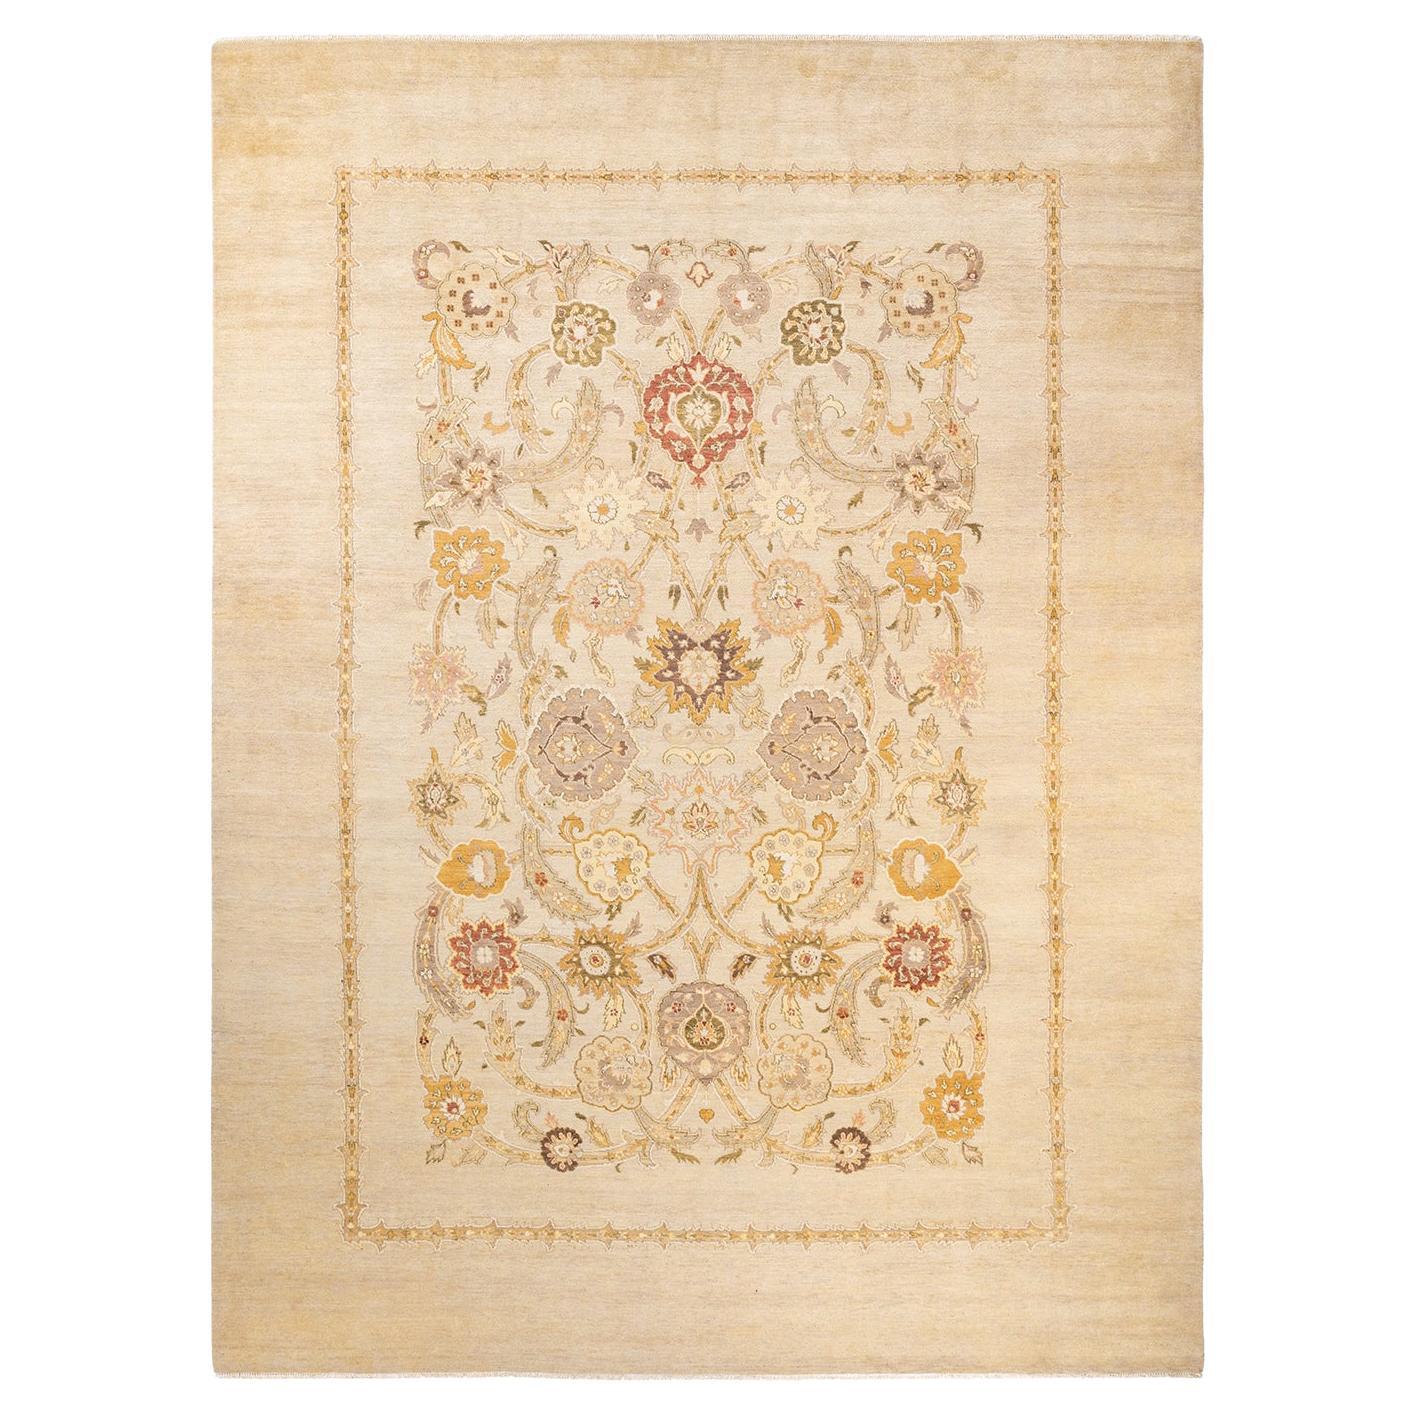 One-of-a-Kind Hand Knotted Contemporary Eclectic Ivory Area Rug